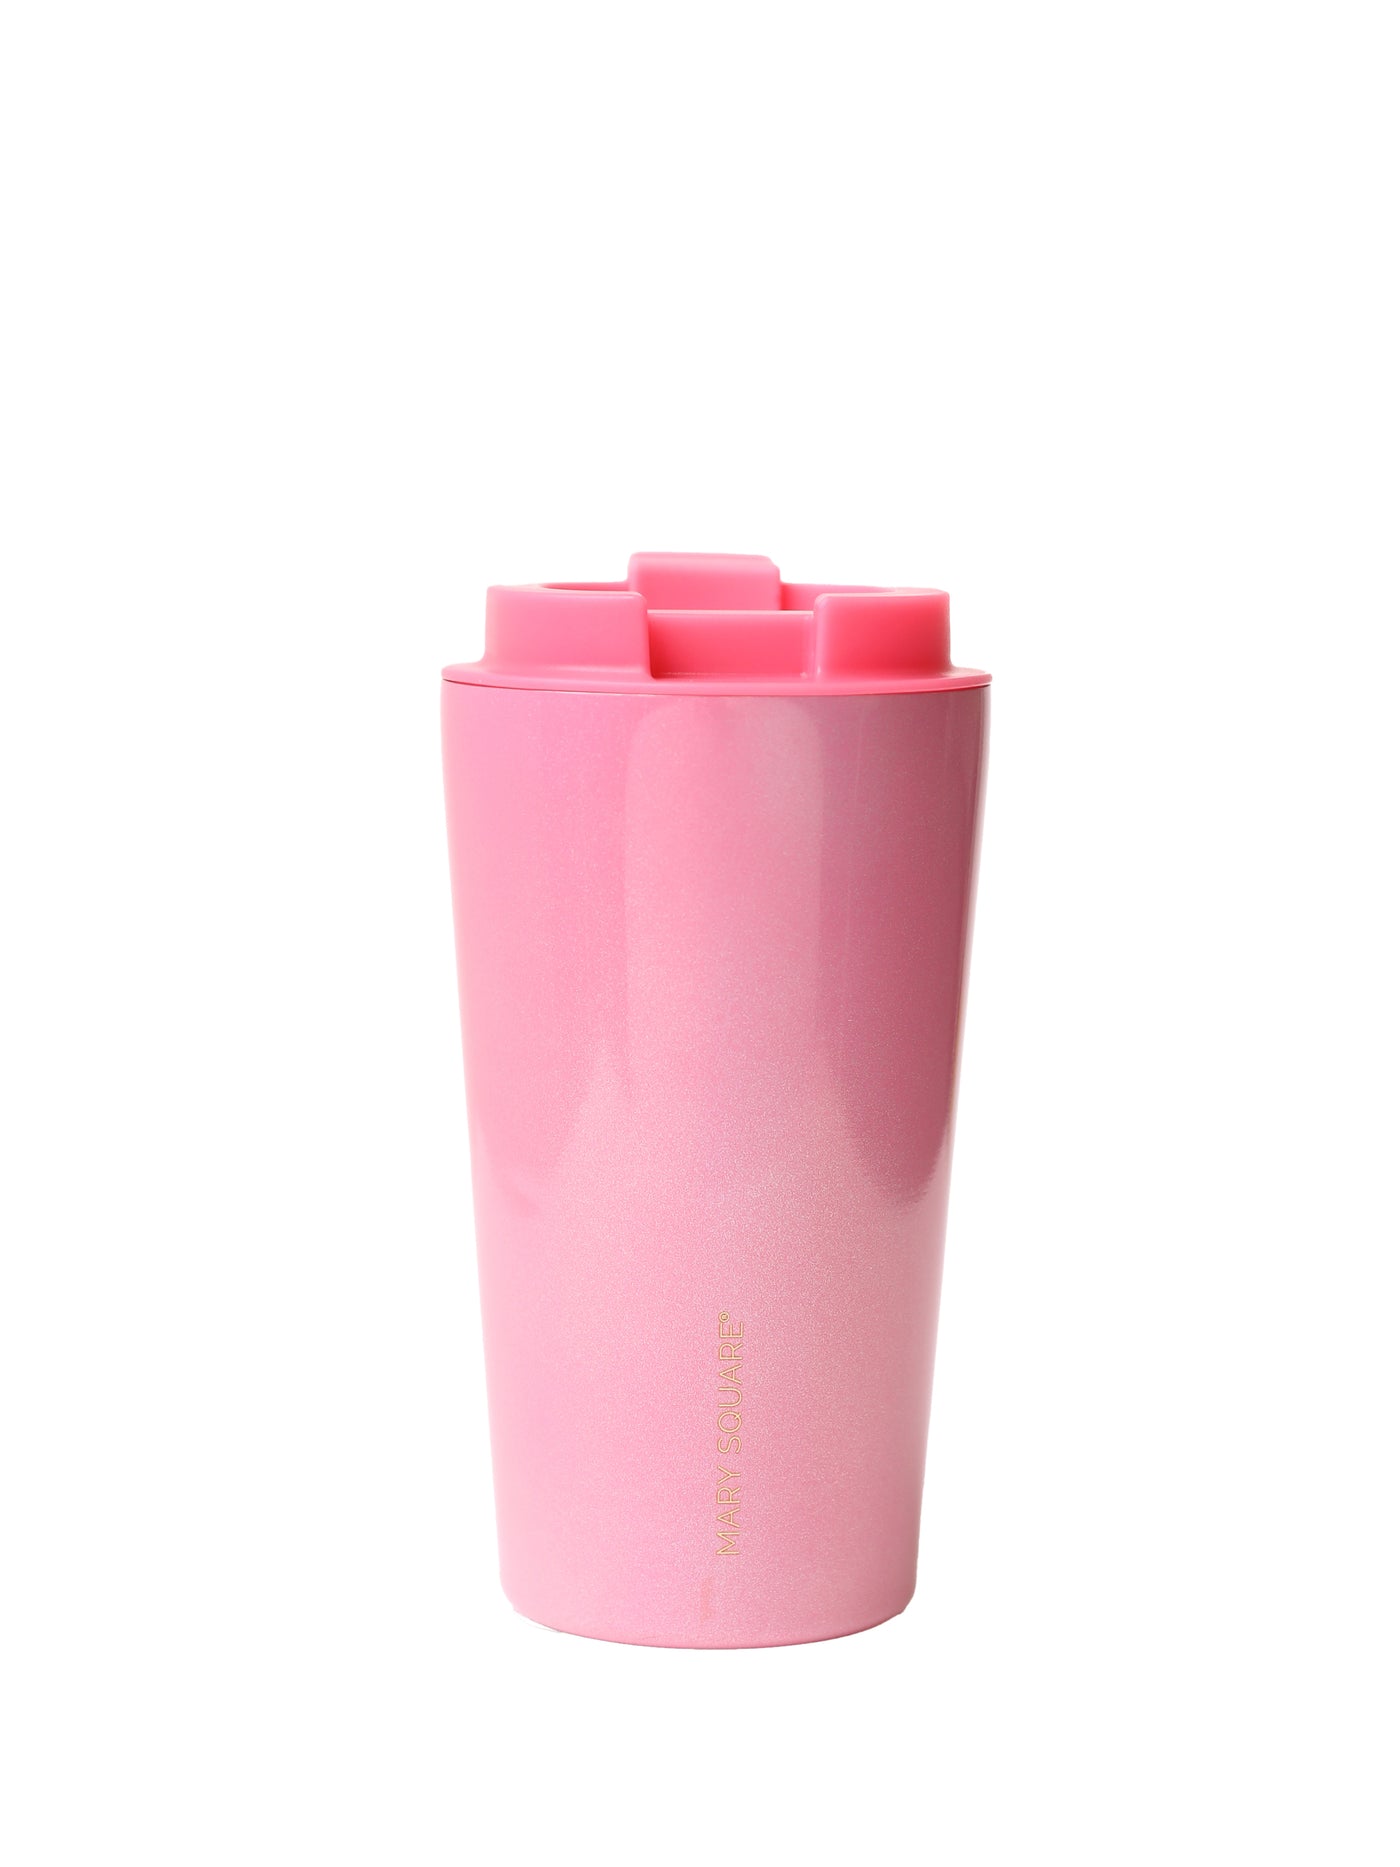 Pearlized Pink | Stainless To-Go Coffee Tumbler 15oz - Mary Square, LLC